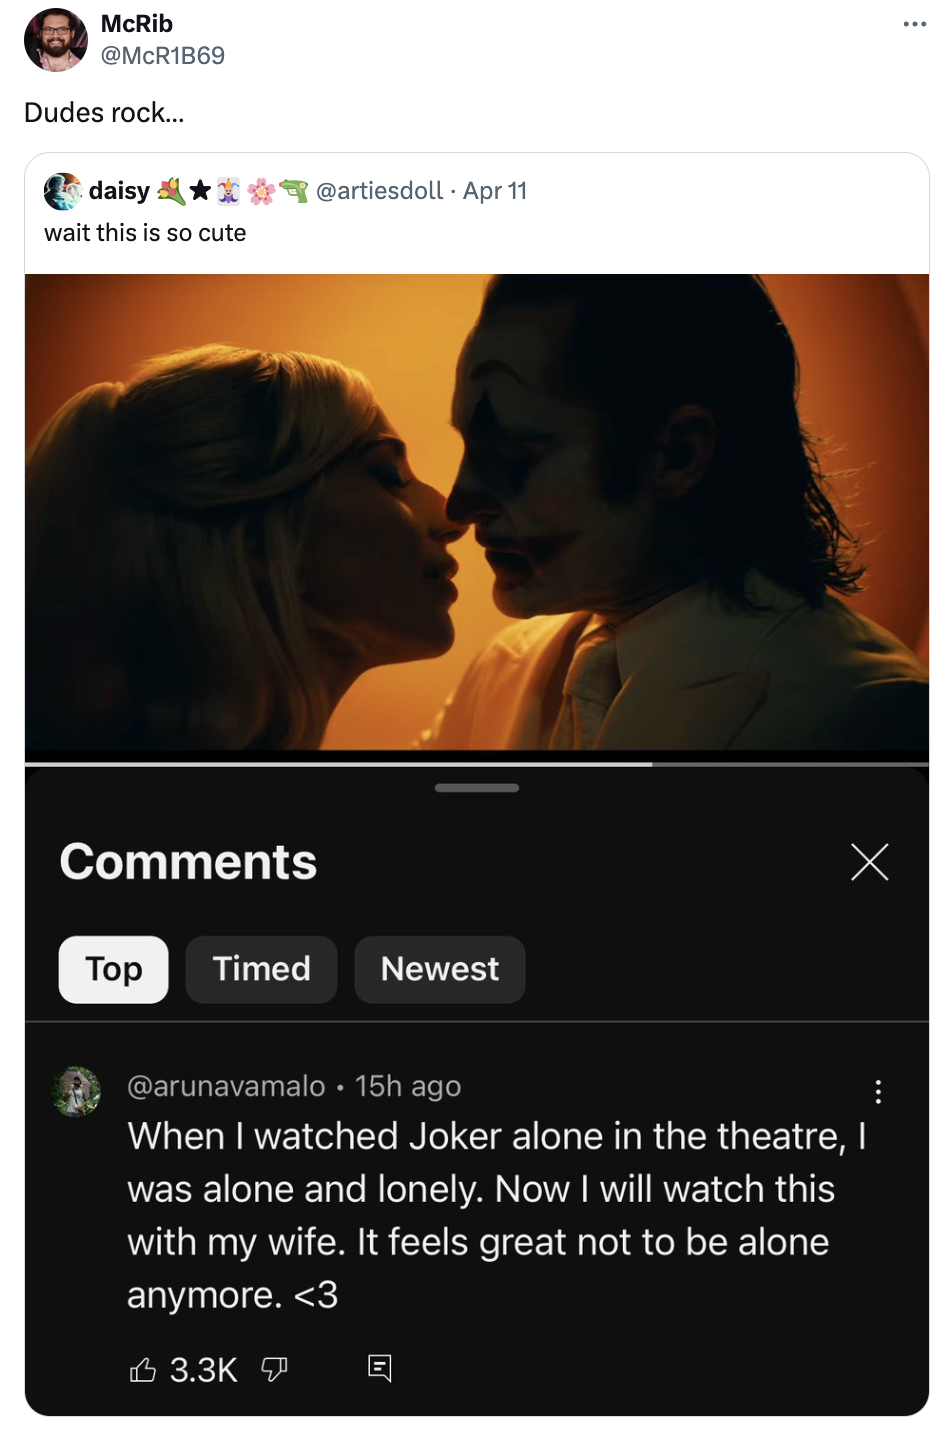 screenshot - McRib Dudes rock... daisy Apr 11 wait this is so cute Top Timed Newest 15h ago When I watched Joker alone in the theatre, I was alone and lonely. Now I will watch this with my wife. It feels great not to be alone anymore.